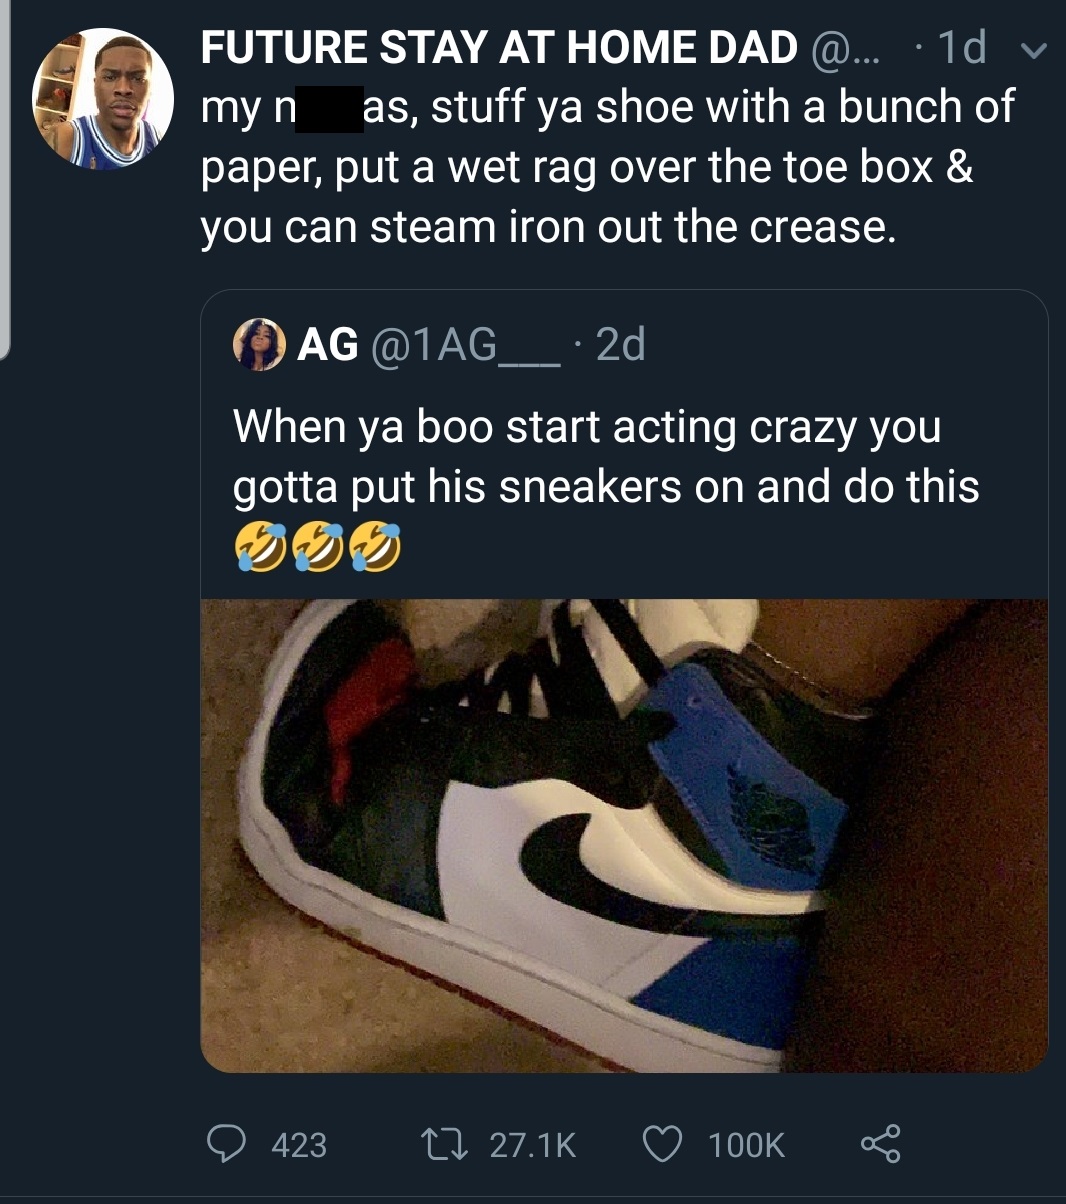 outdoor shoe - Future Stay At Home Dad @... 1d v myn as, stuff ya shoe with a bunch of paper, put a wet rag over the toe box & you can steam iron out the crease. Ag . 2d When ya boo start acting crazy you gotta put his sneakers on and do this O 423 27